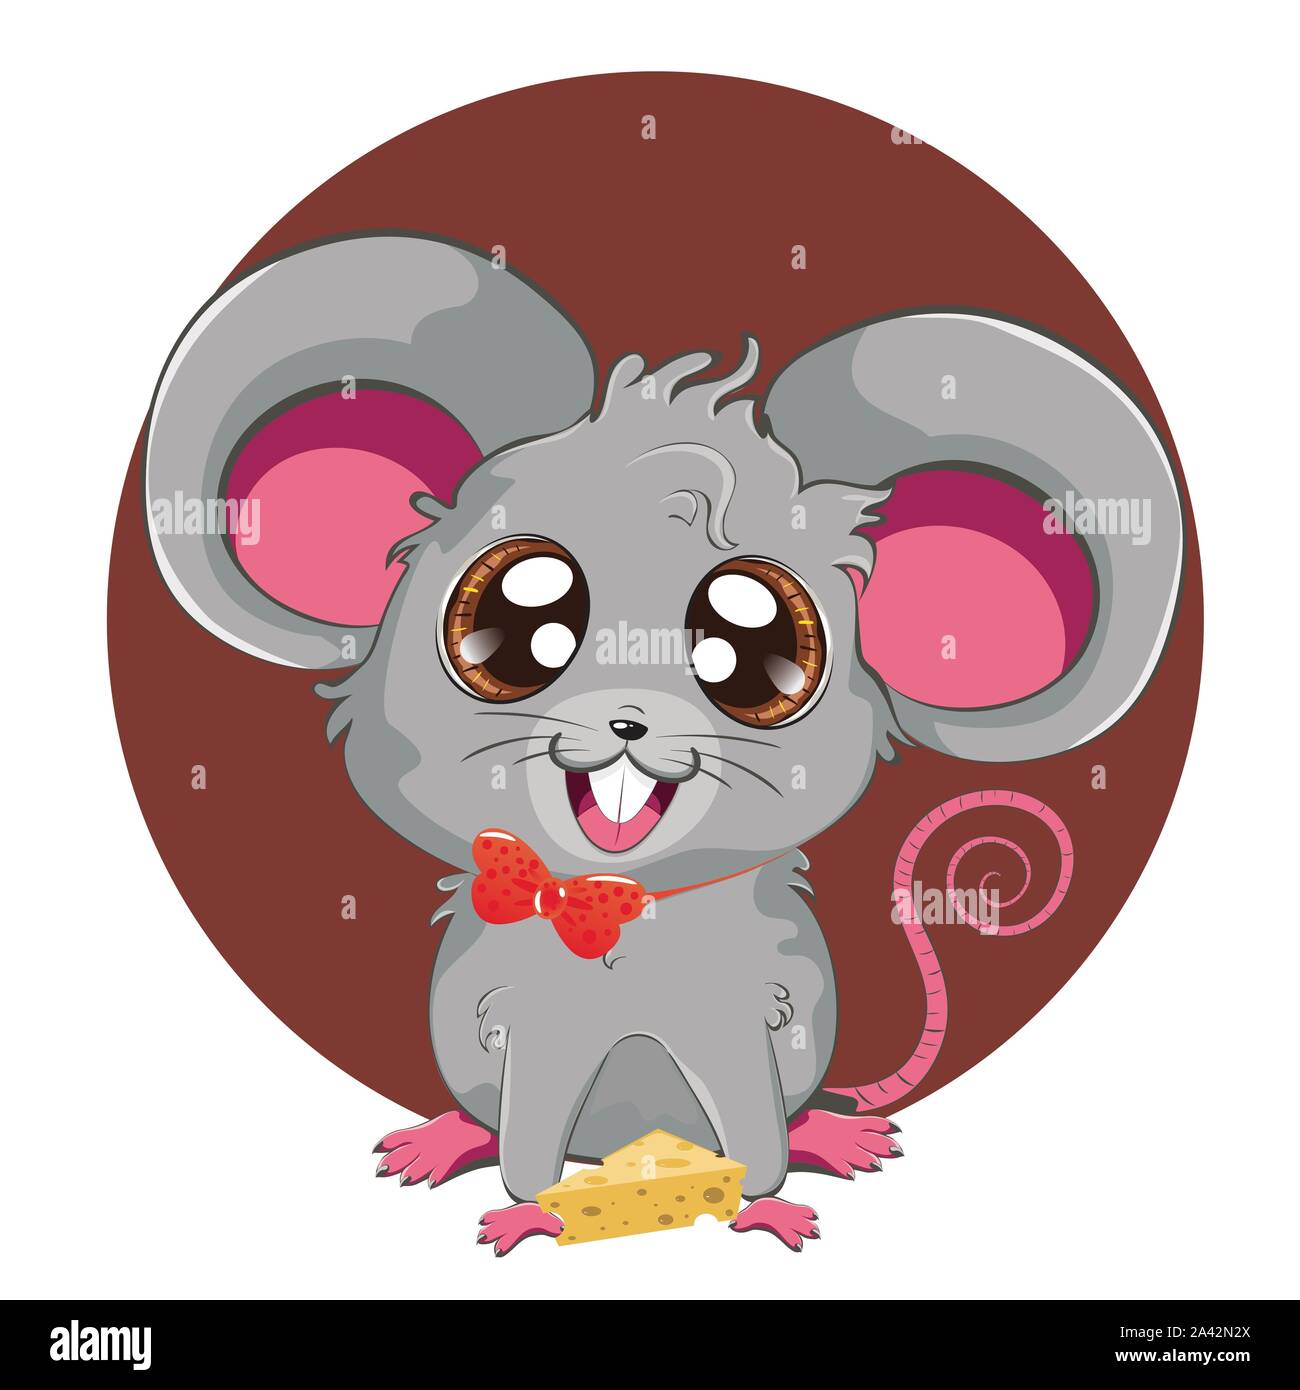 Anime Mouse Stock Illustrations – 992 Anime Mouse Stock Illustrations,  Vectors & Clipart - Dreamstime